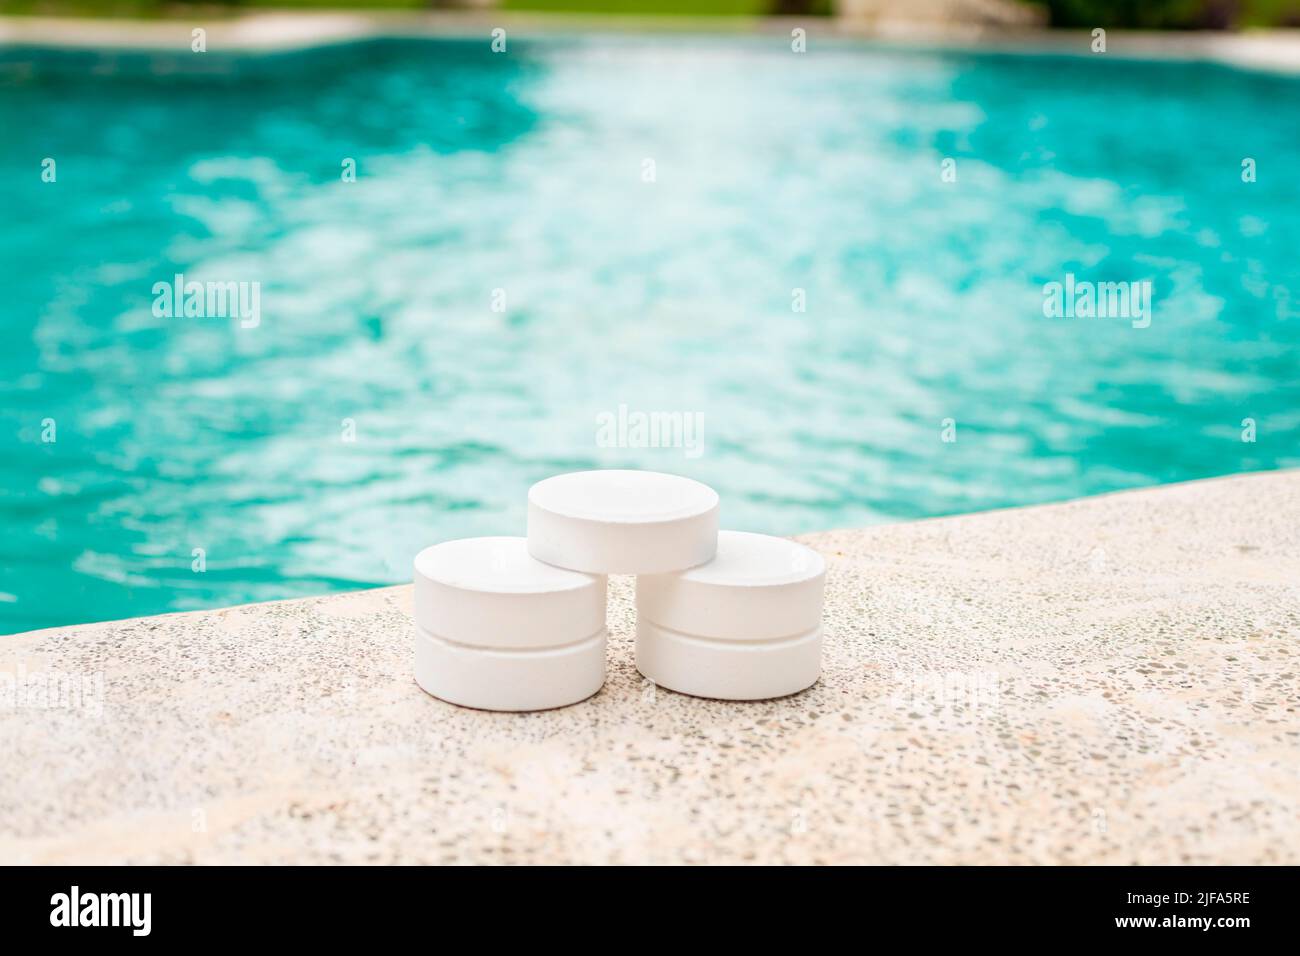 Chlorine tablets on the edge of a swimming pool, Closeup of chlorine tablets for swimming pool cleaning, chlorine tablets for swimming pool Stock Photo